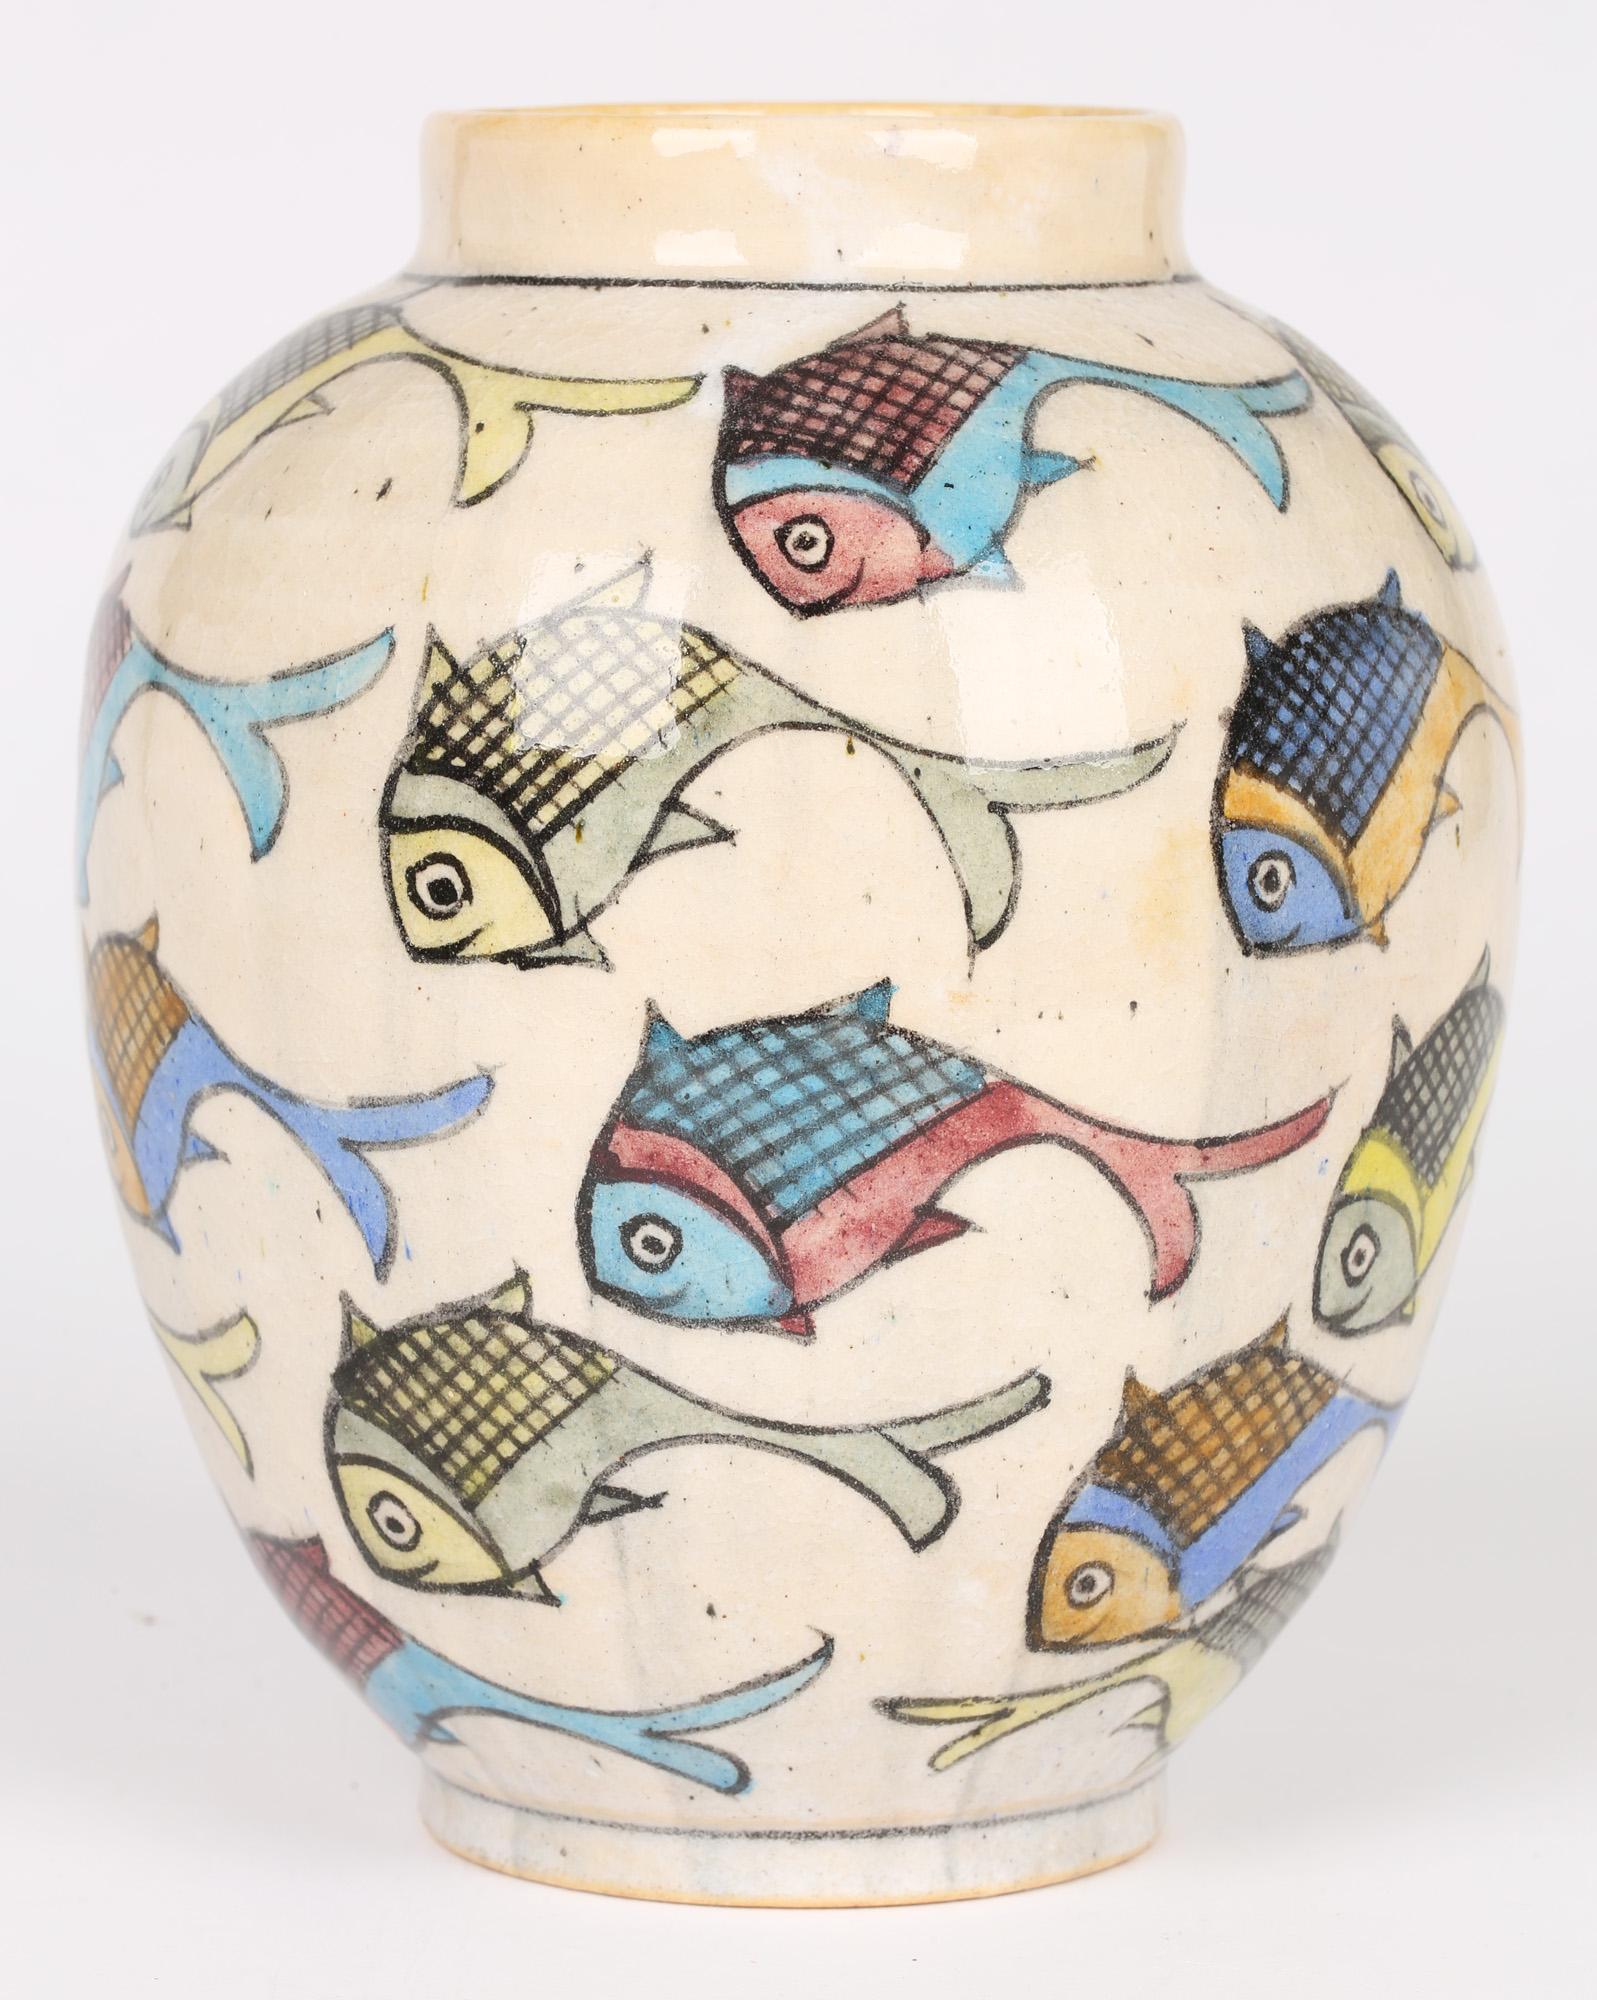 A good decorative antique Middle Eastern pottery vase painted with fish probably Iznik and dating from the early 20th century. The rounded bulbous vase stands on narrow rounded foot with a narrow funnel shape top. The body of the vase is hand